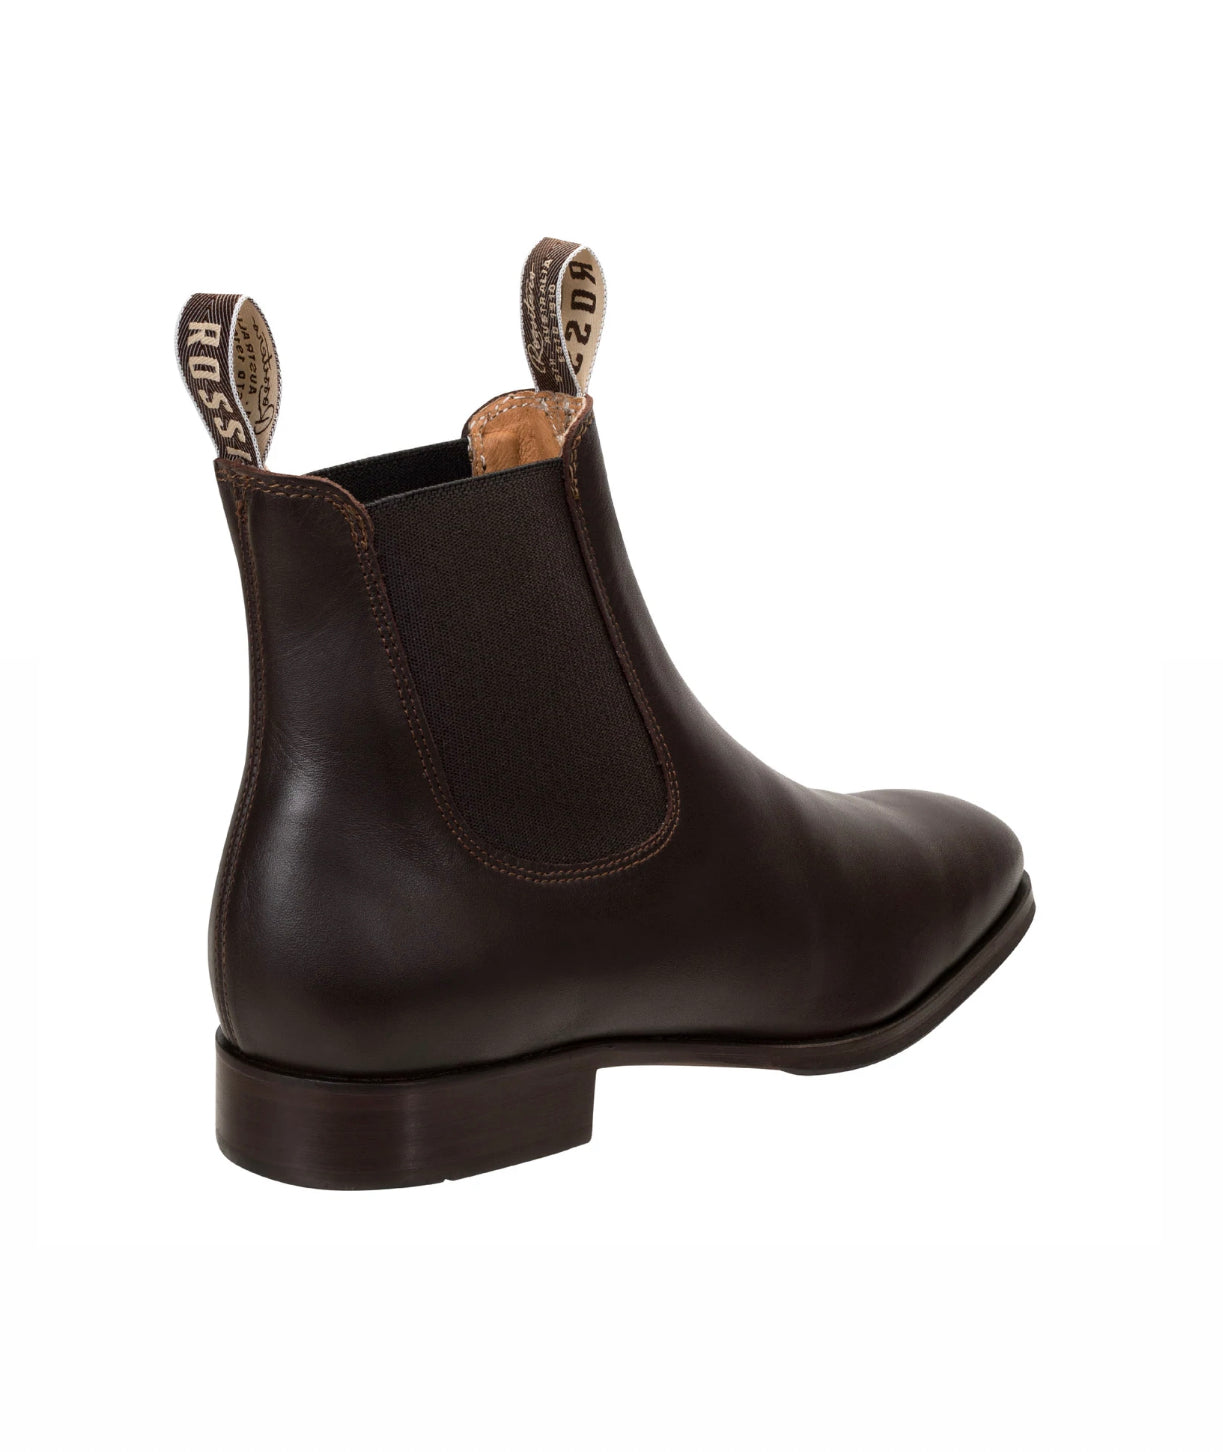 Rossi Boots 5020 Tennant Brown Chelsea Boot Made In Portugal